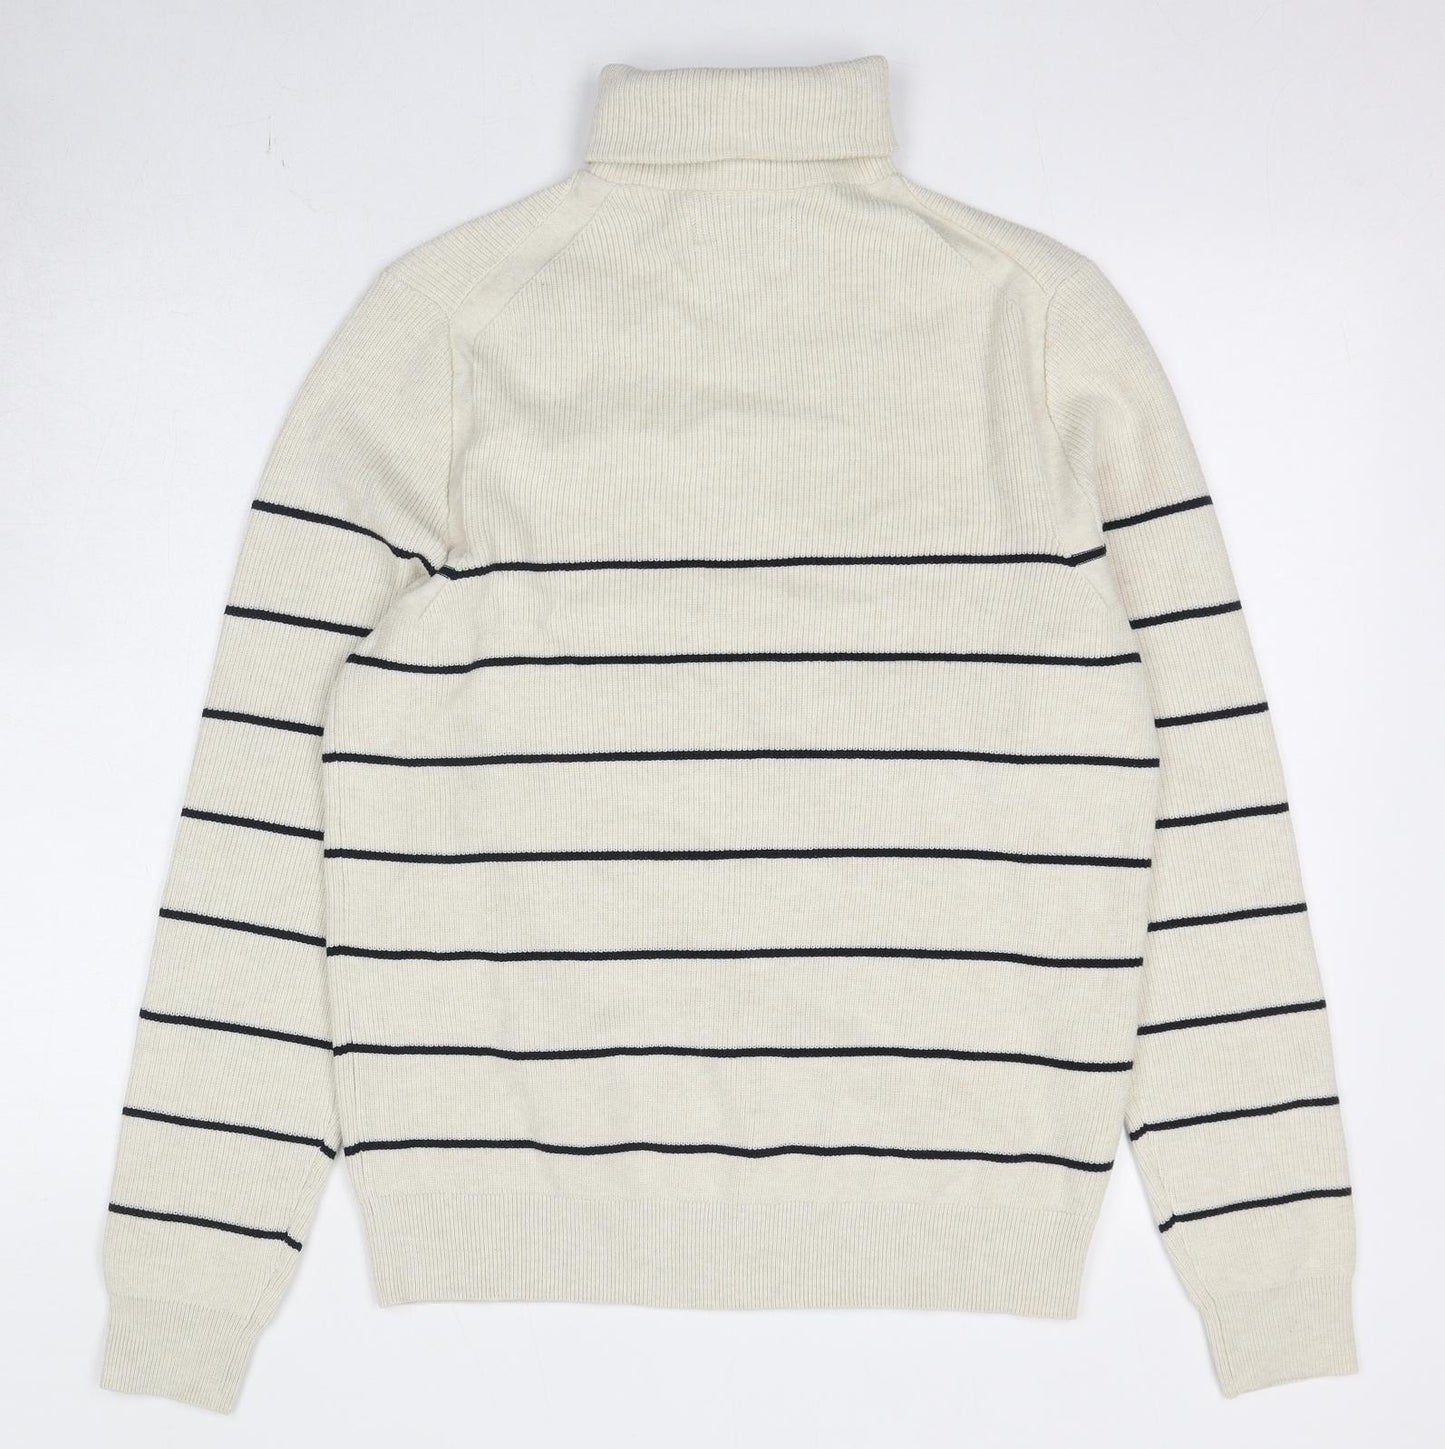 Marks and Spencer Mens Ivory High Neck Striped Cotton Blend Pullover Jumper Size S Long Sleeve